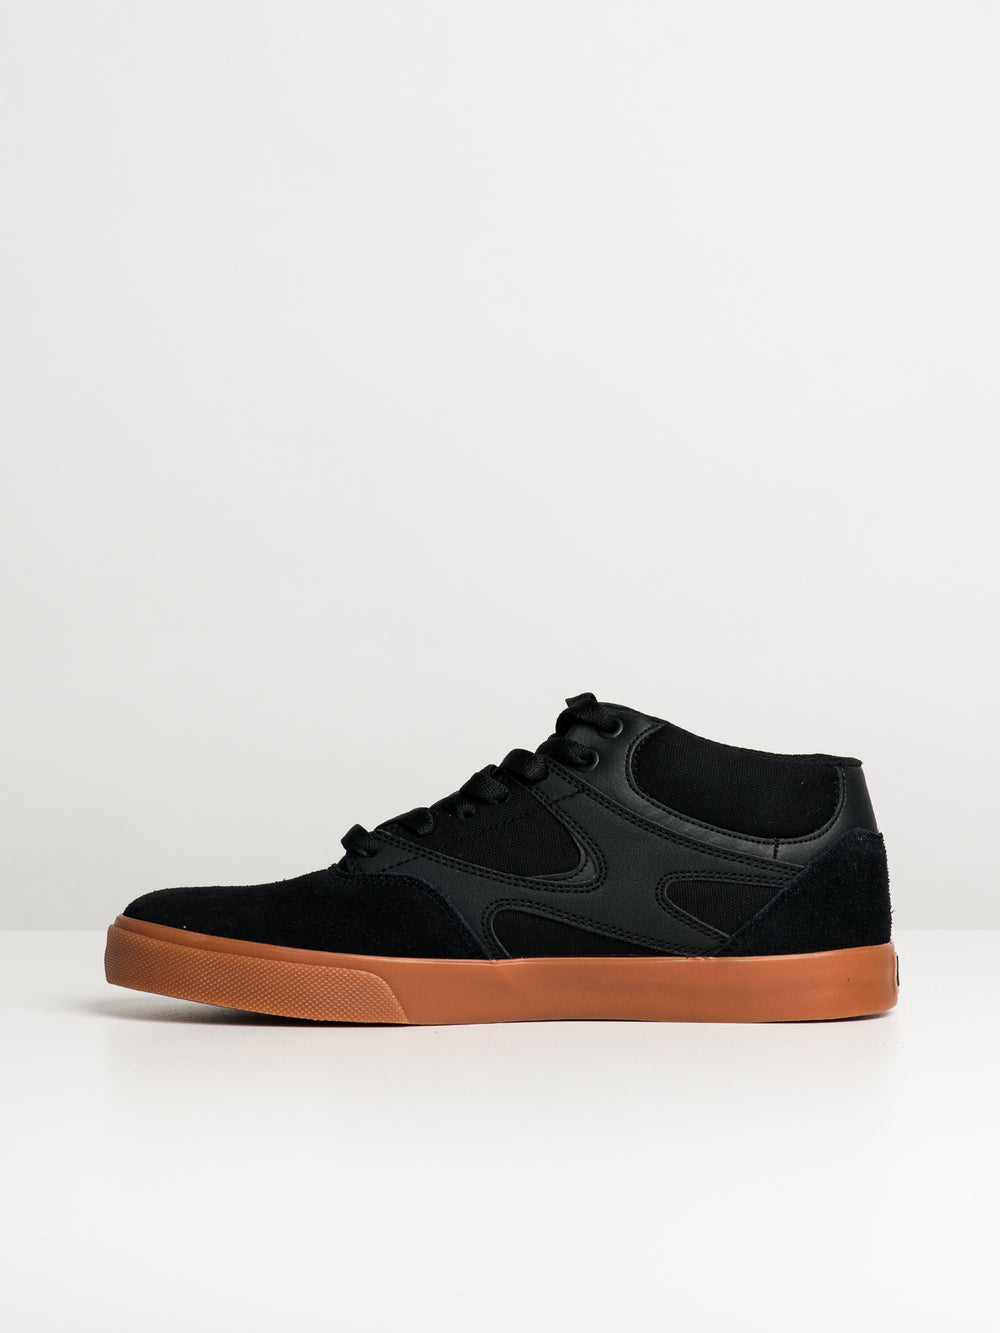 MENS DC SHOES KALIS VULC MID SNEAKER - CLEARANCE